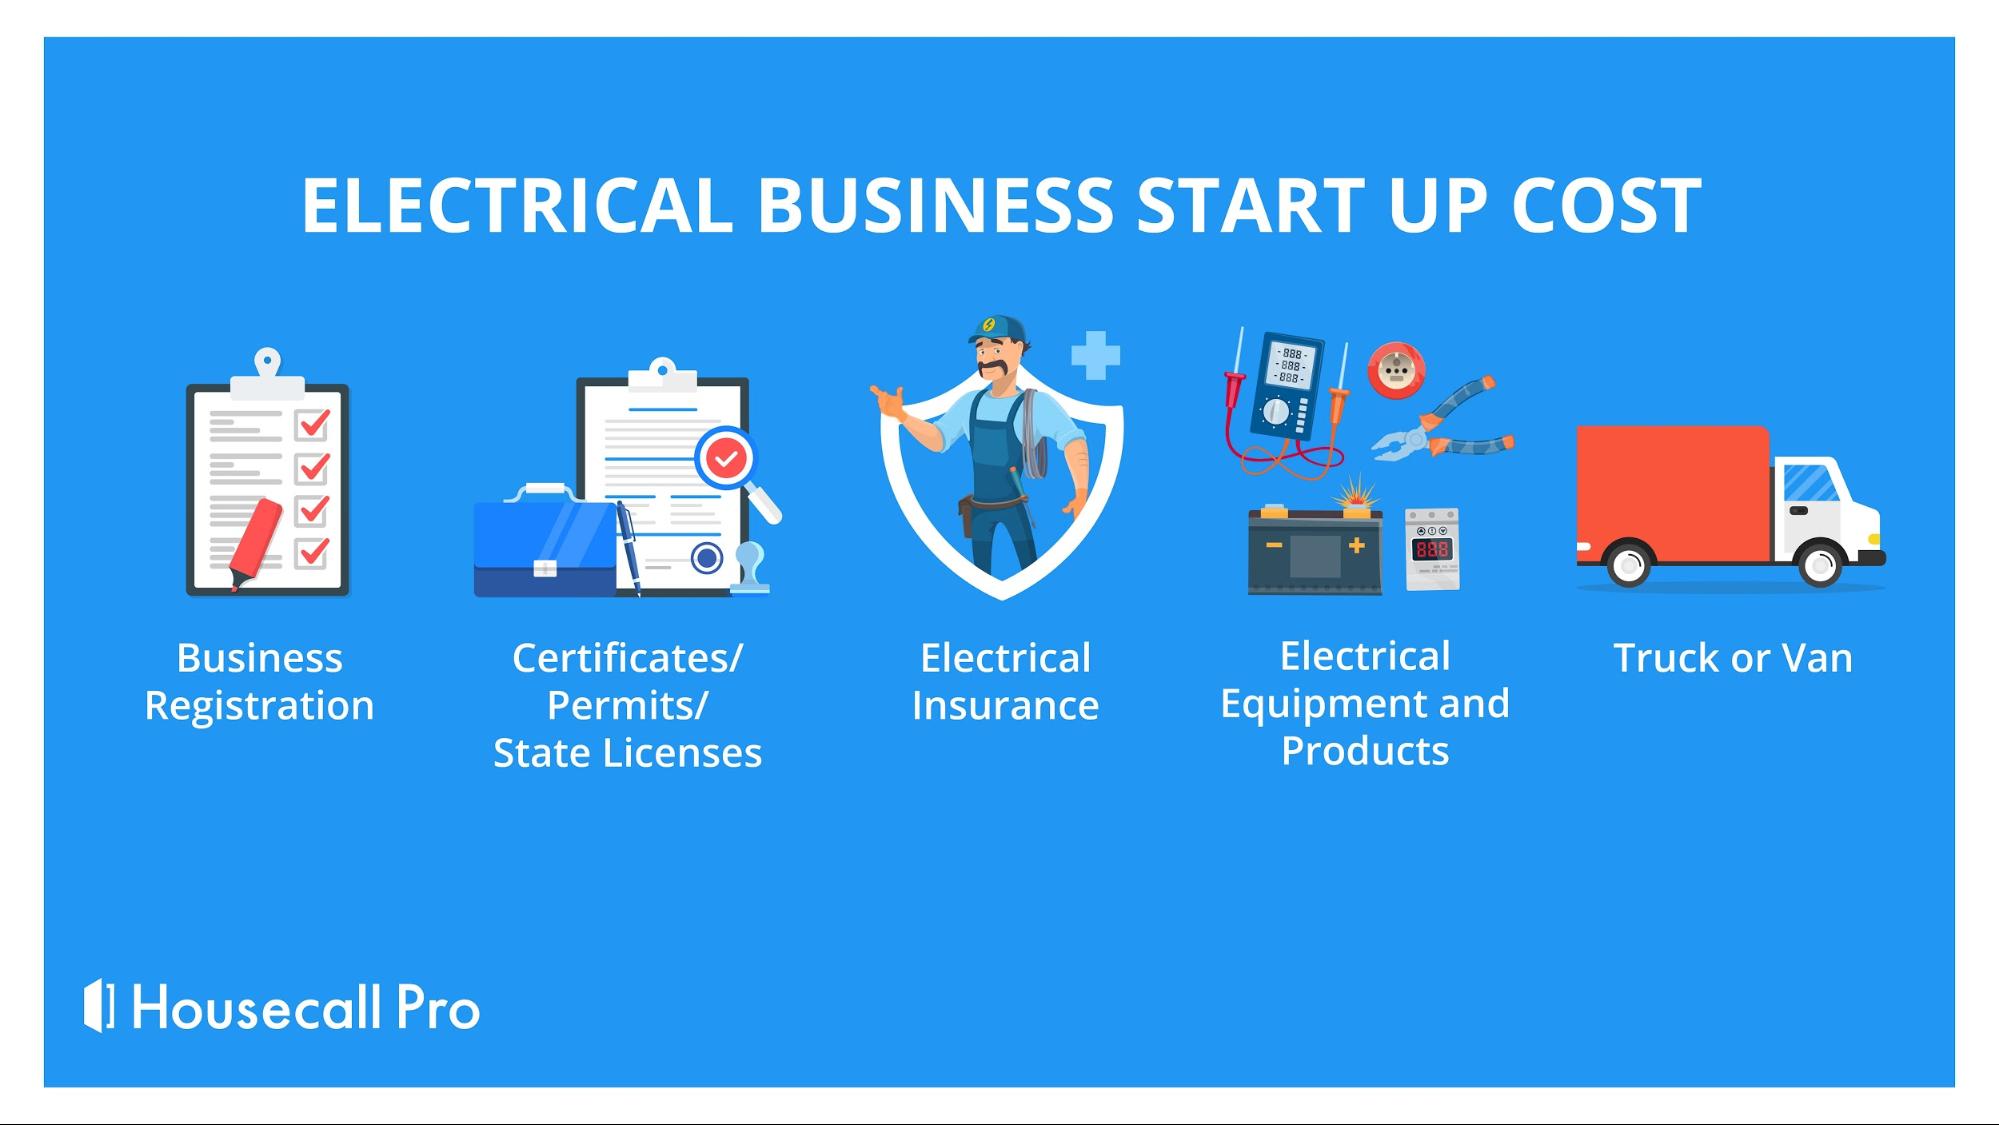 Electrical business start-up costs